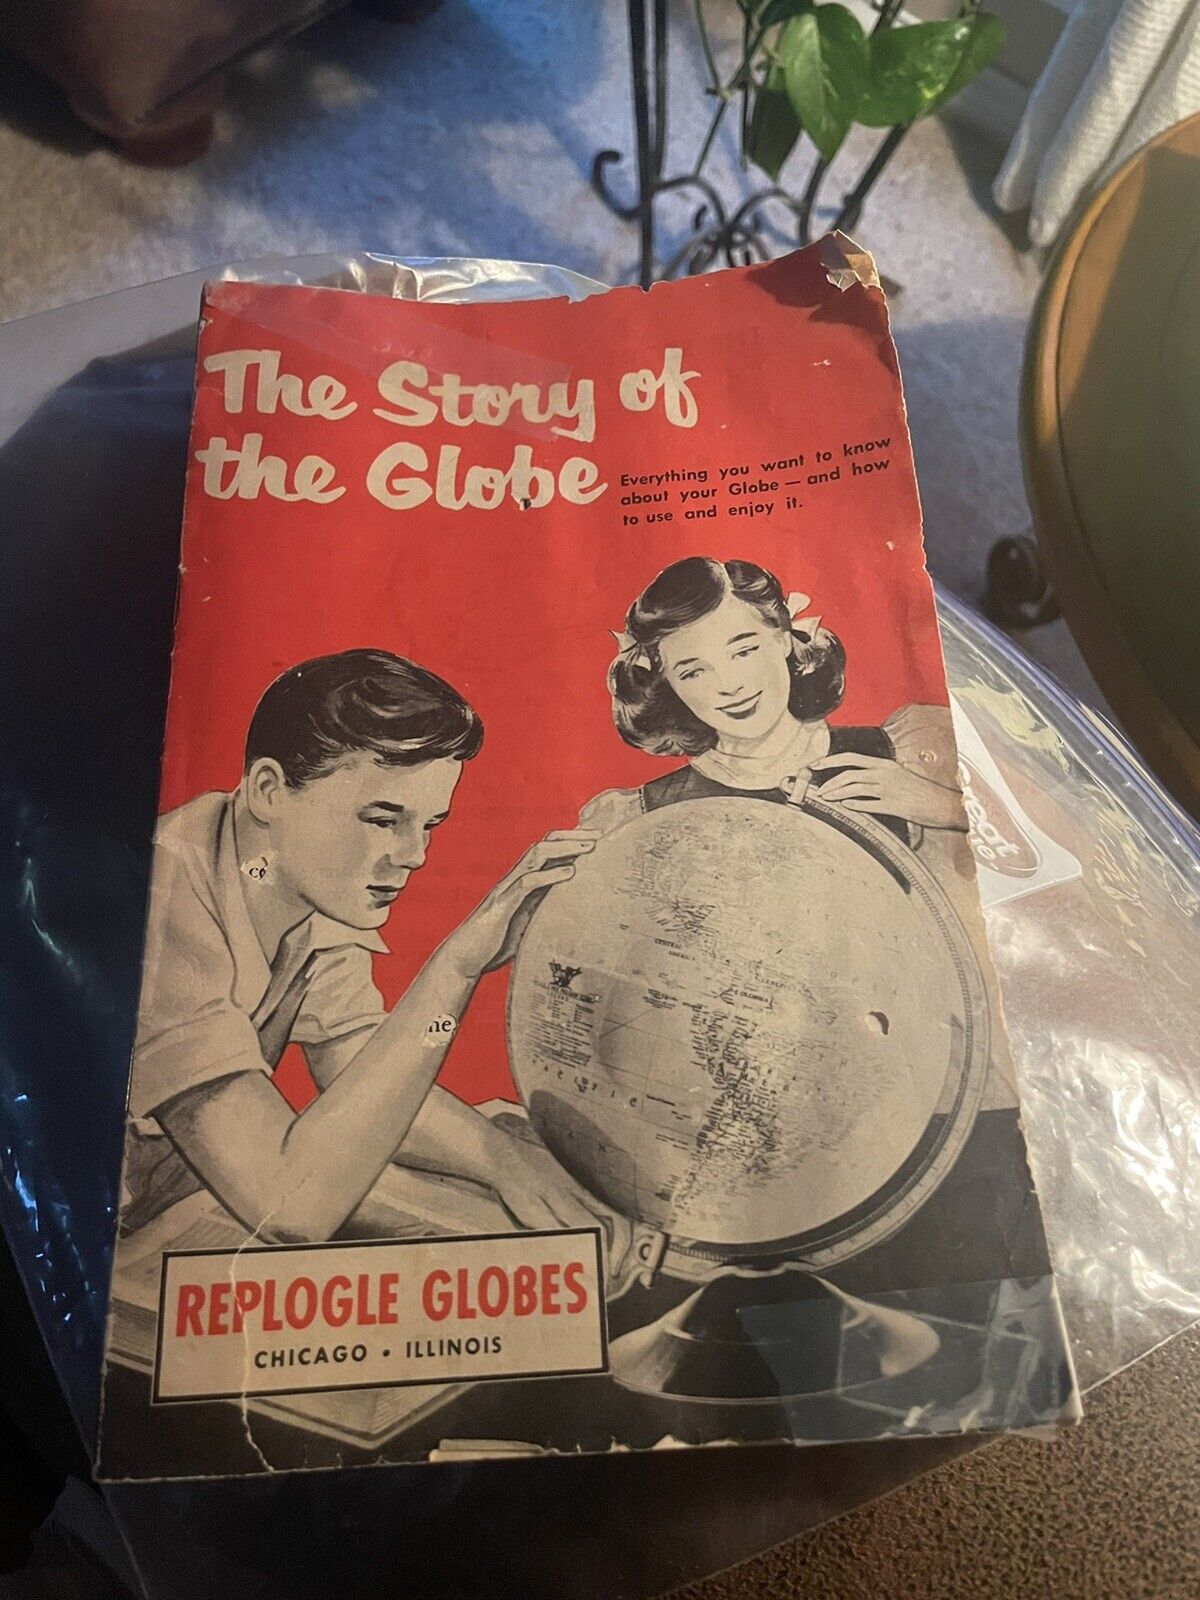 1954 The Story Of The Globe Booklet By Replogle Globes Chicago IL